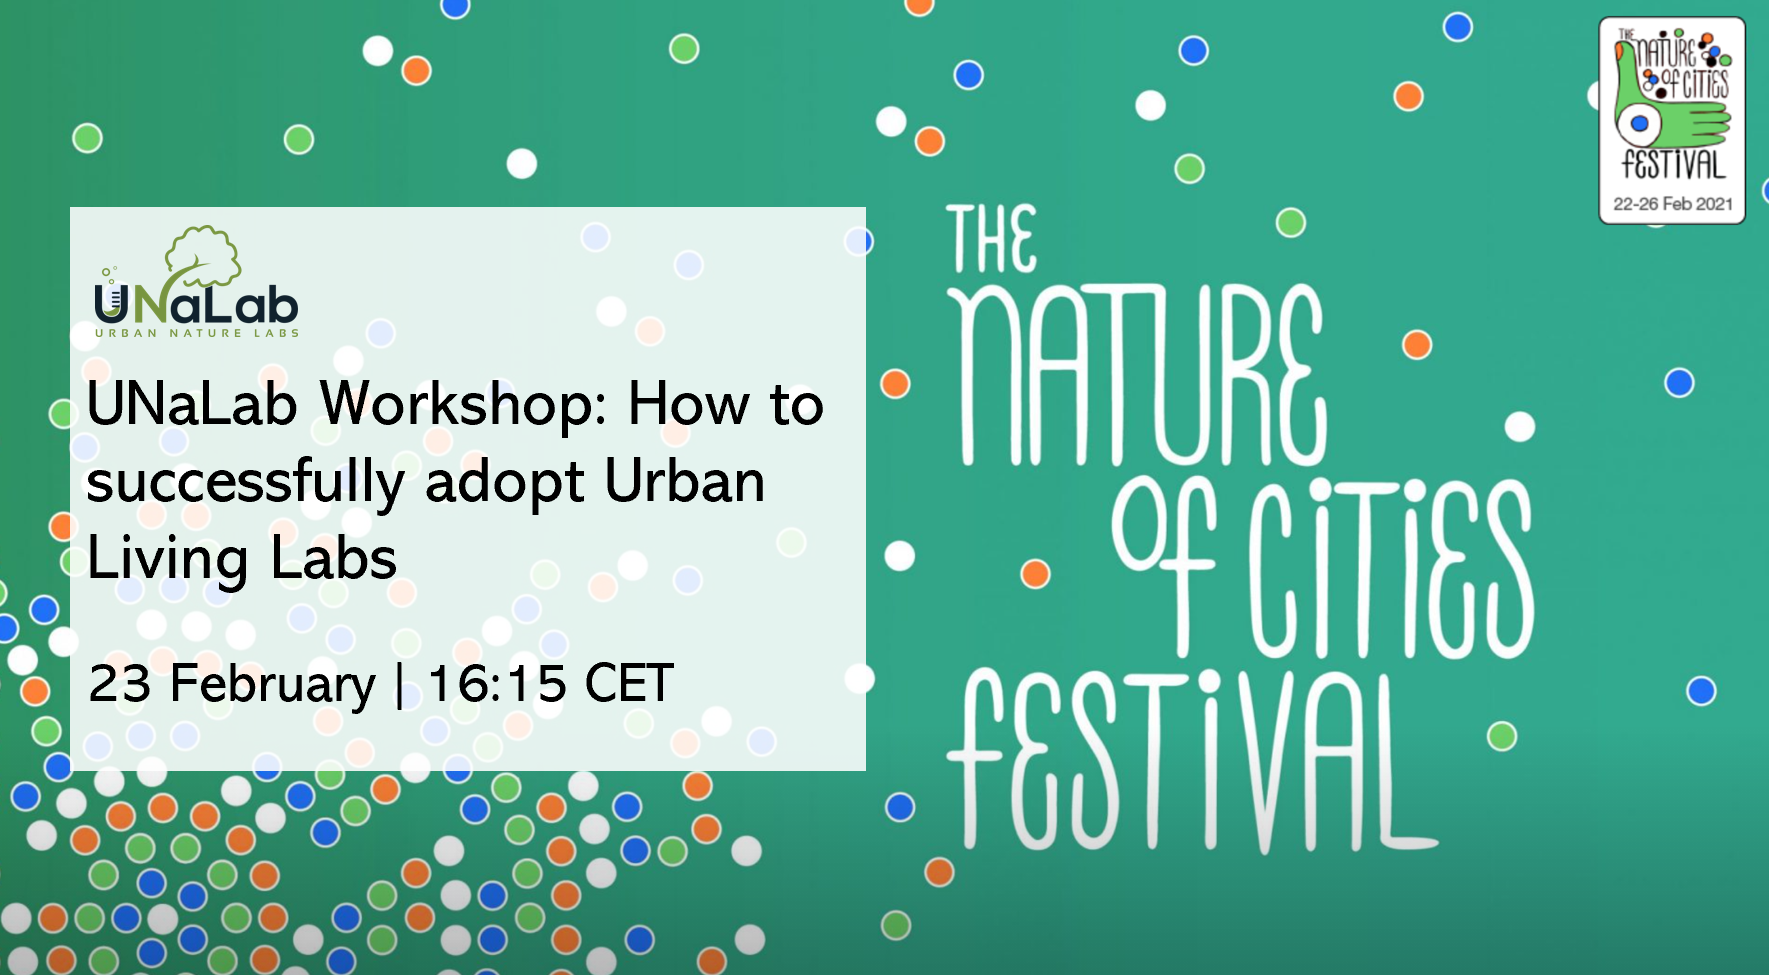 The Nature of Cities Festival